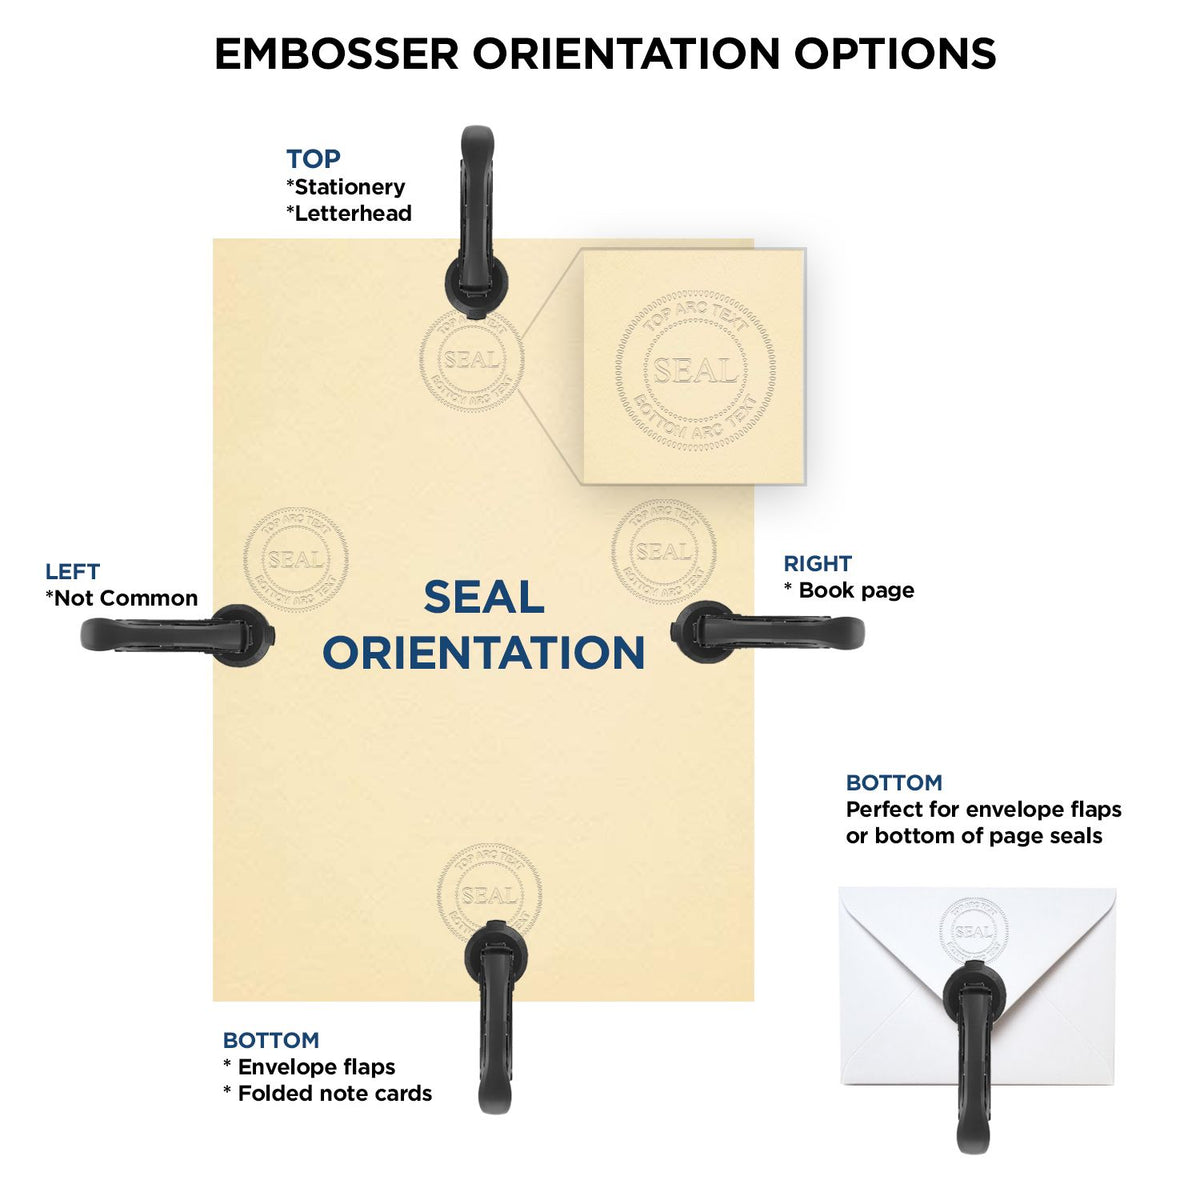 An infographic for the Heavy Duty Cast Iron New Hampshire Engineer Seal Embosser showing embosser orientation, this is showing examples of a top, bottom, right and left insert.